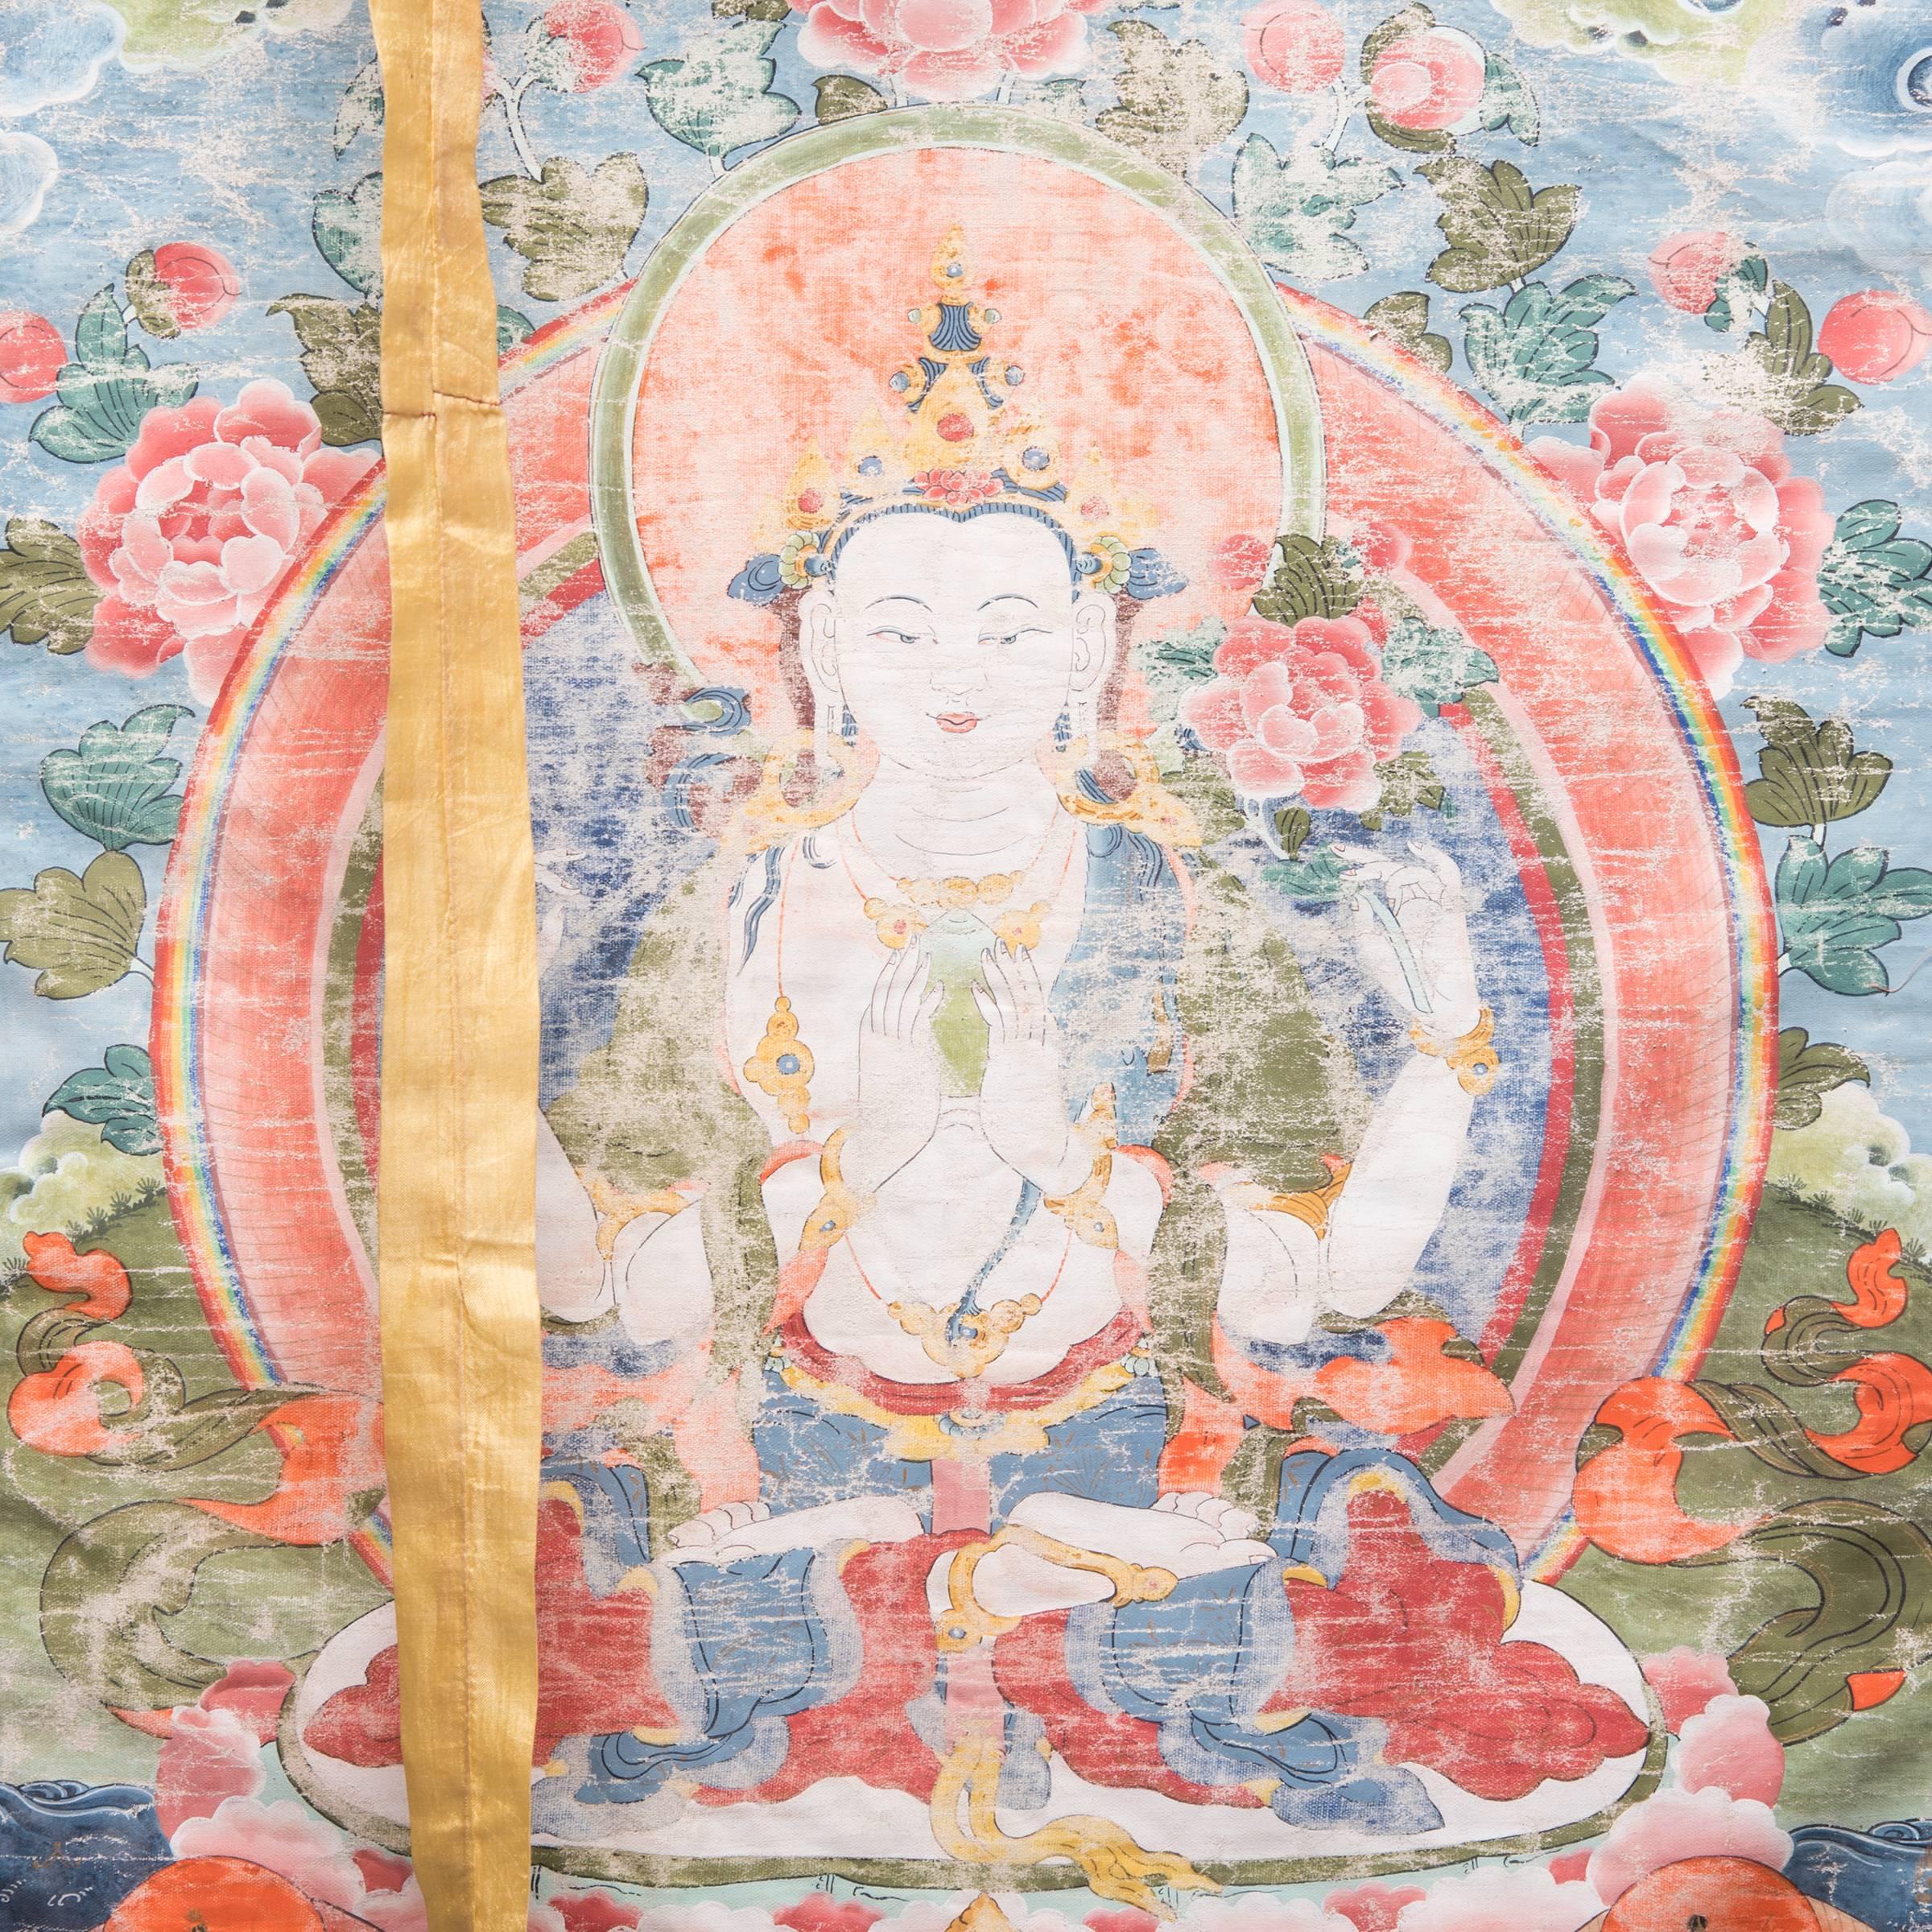 how to date a thangka